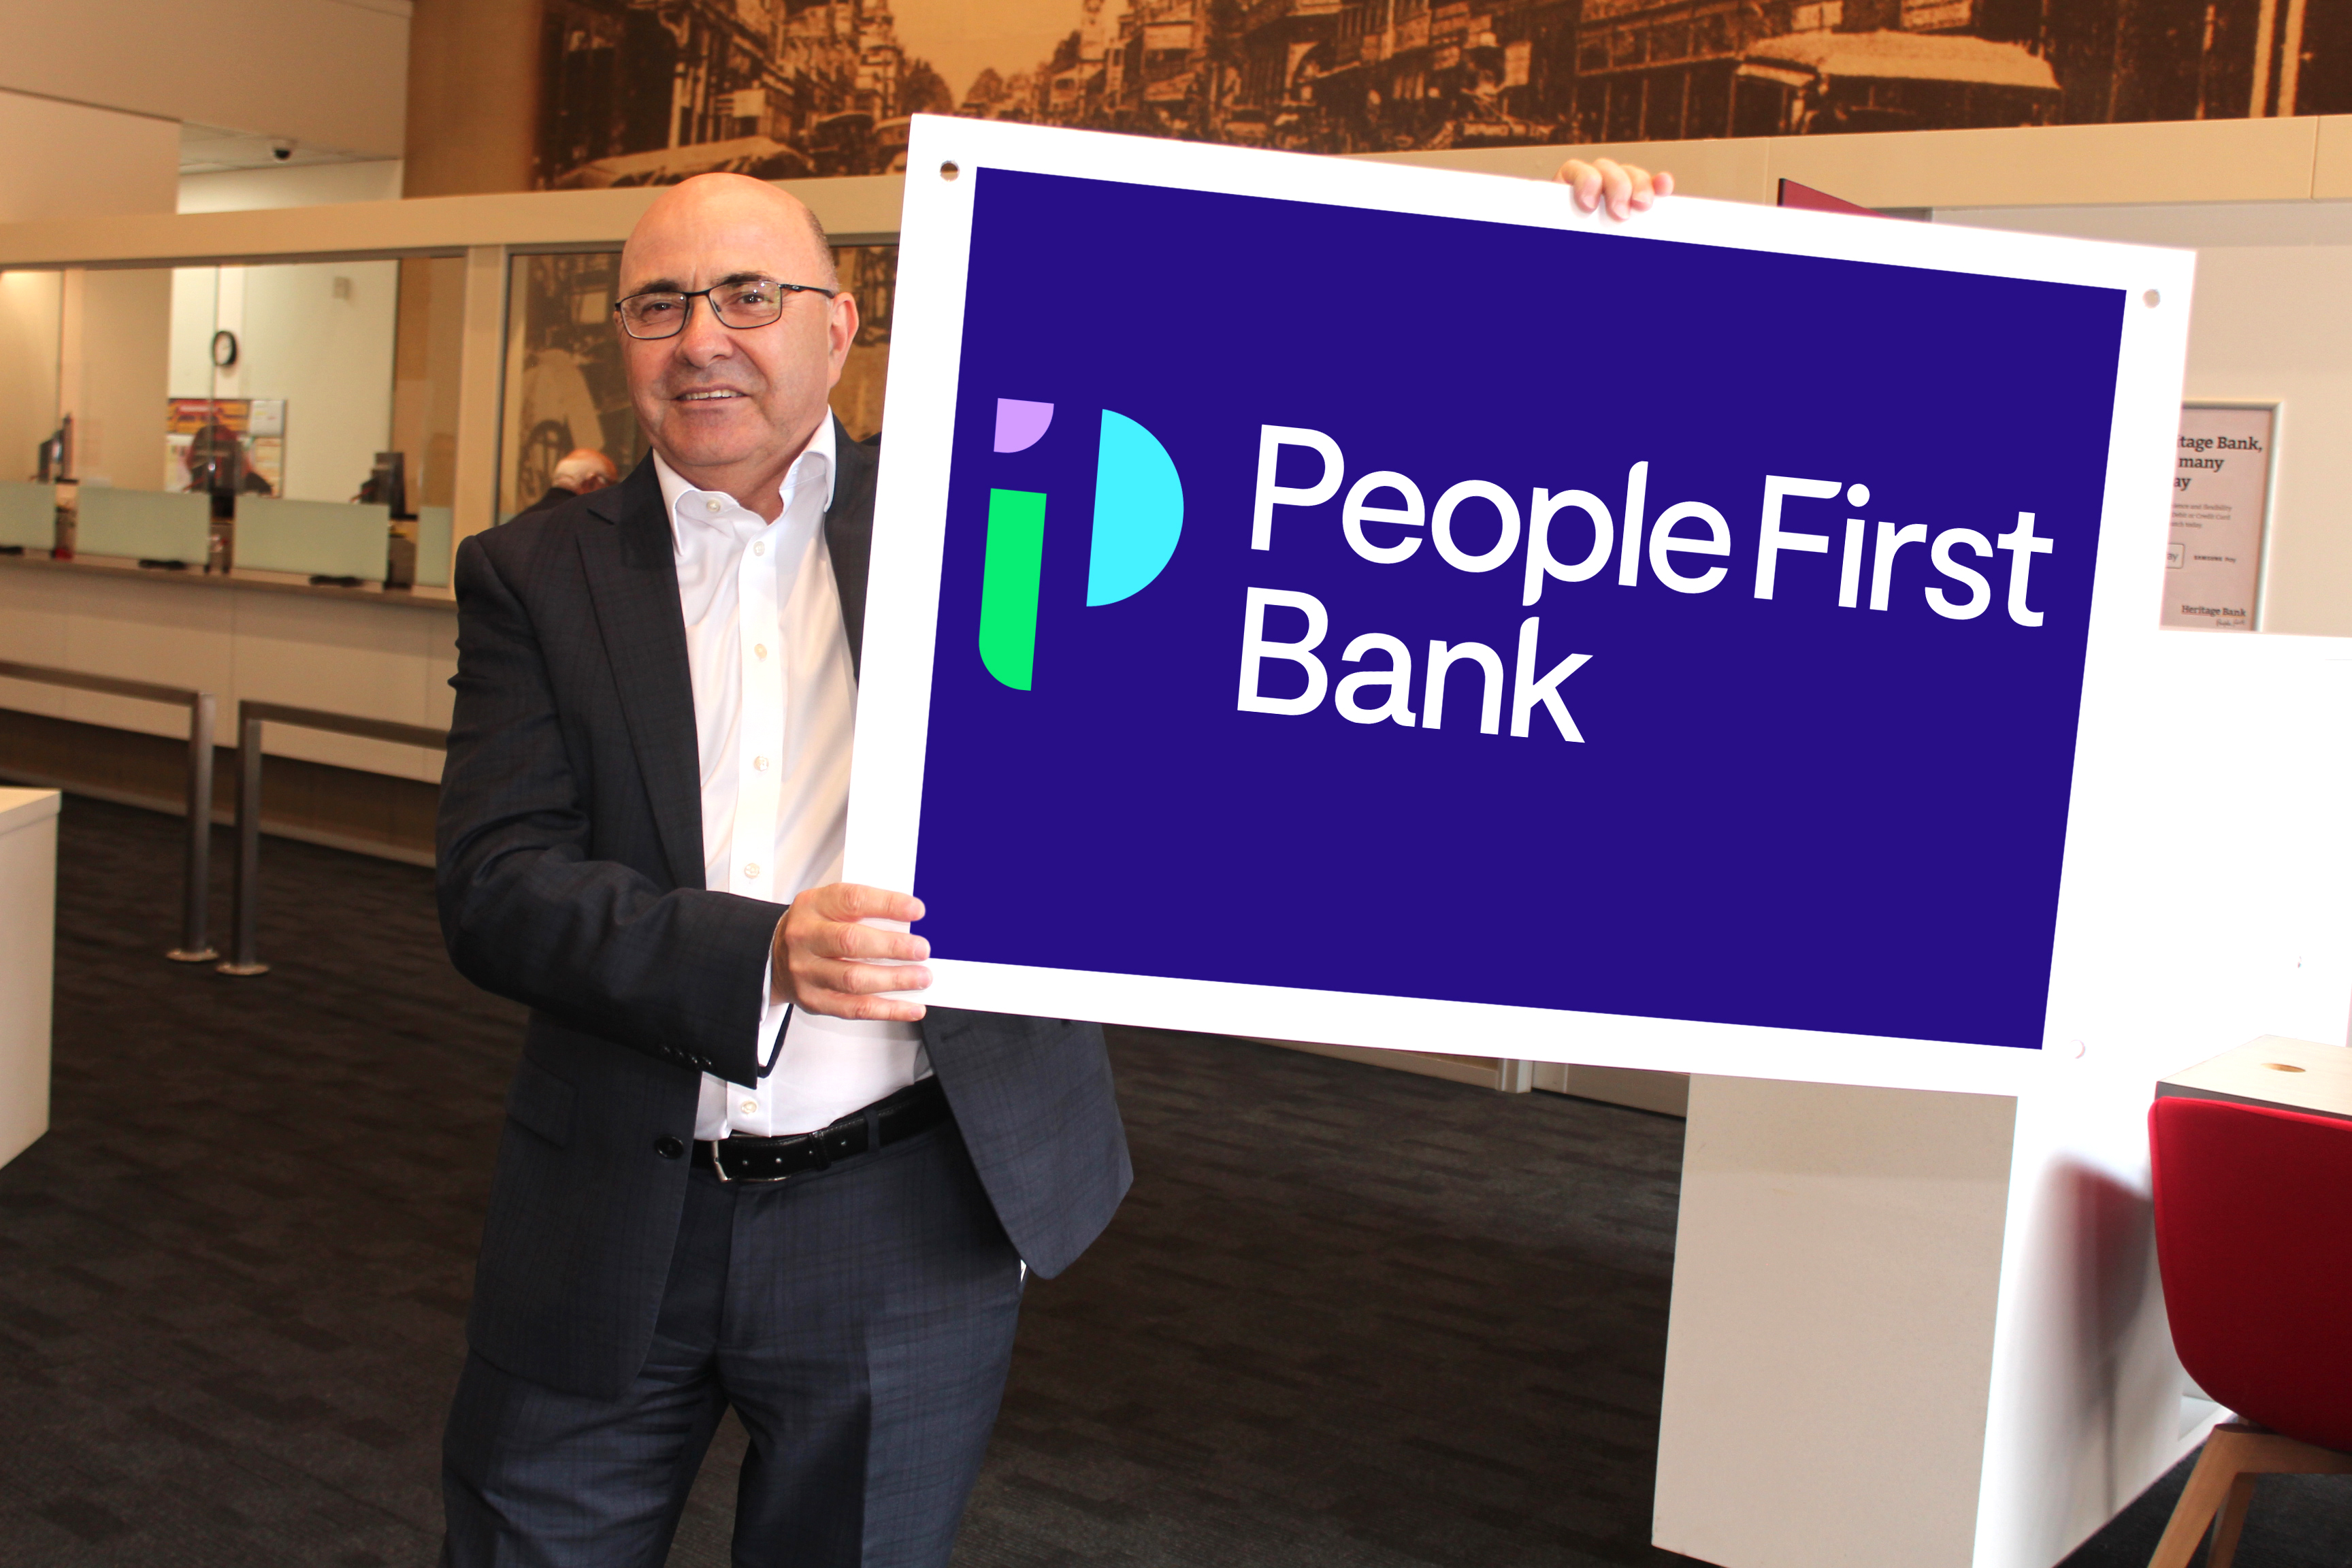 CEO Peter Lock with a sneak peek at the new People First Bank brand